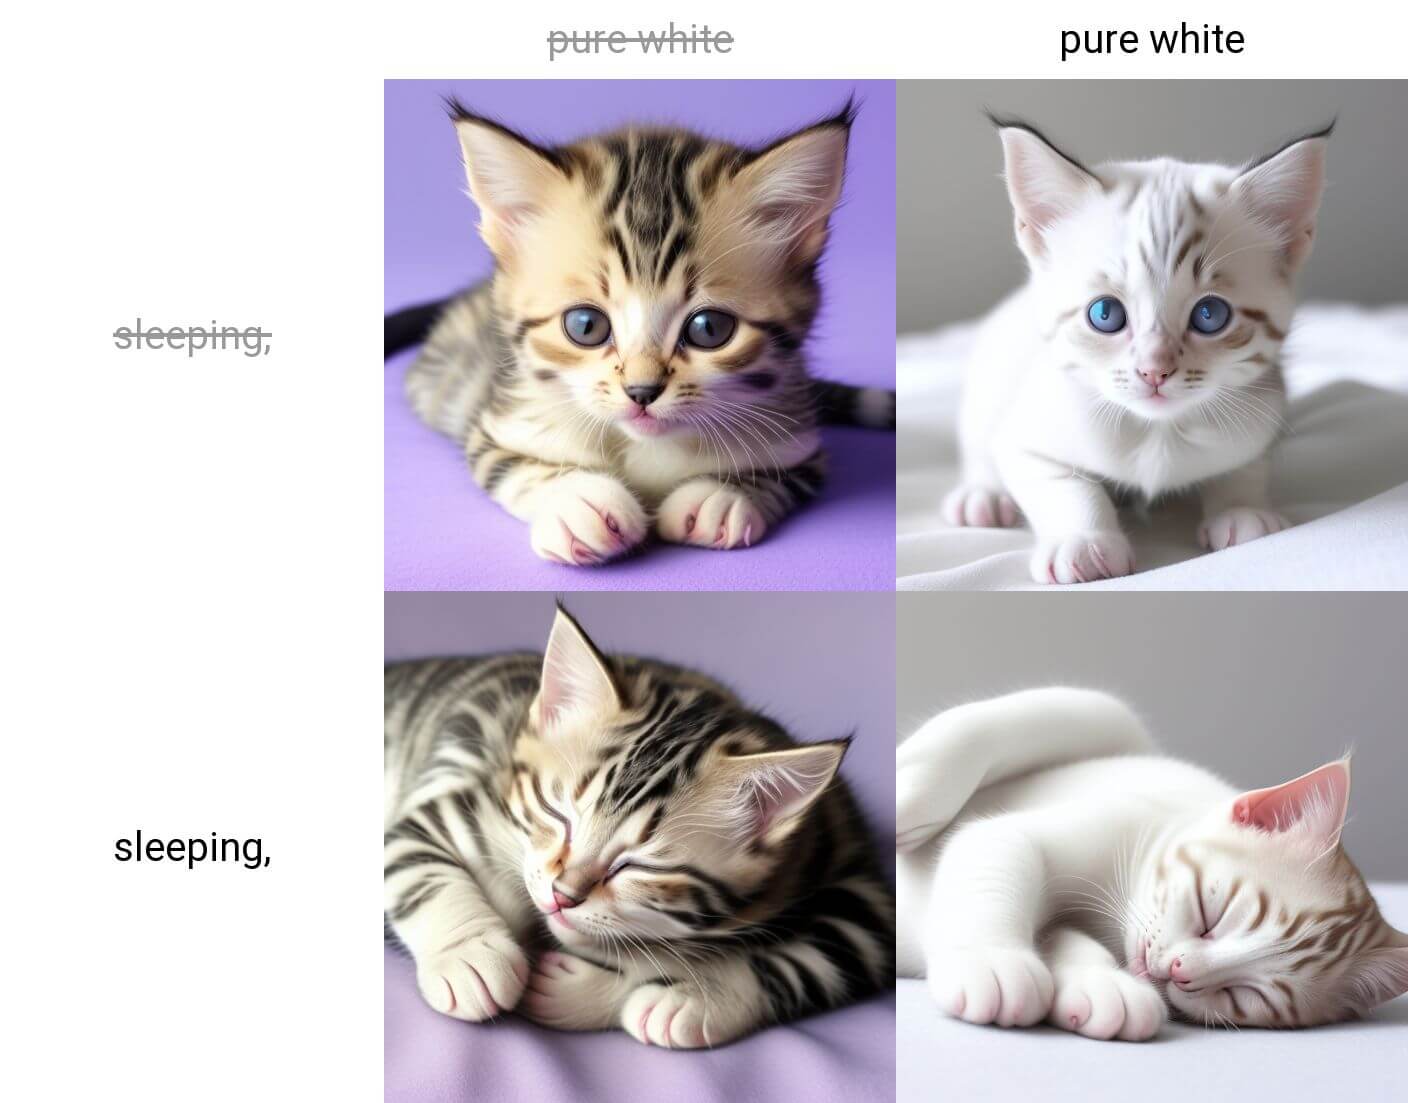 Stable Diffusion web UI-Prompt-matrix_sleeping-pure-white-cat-002